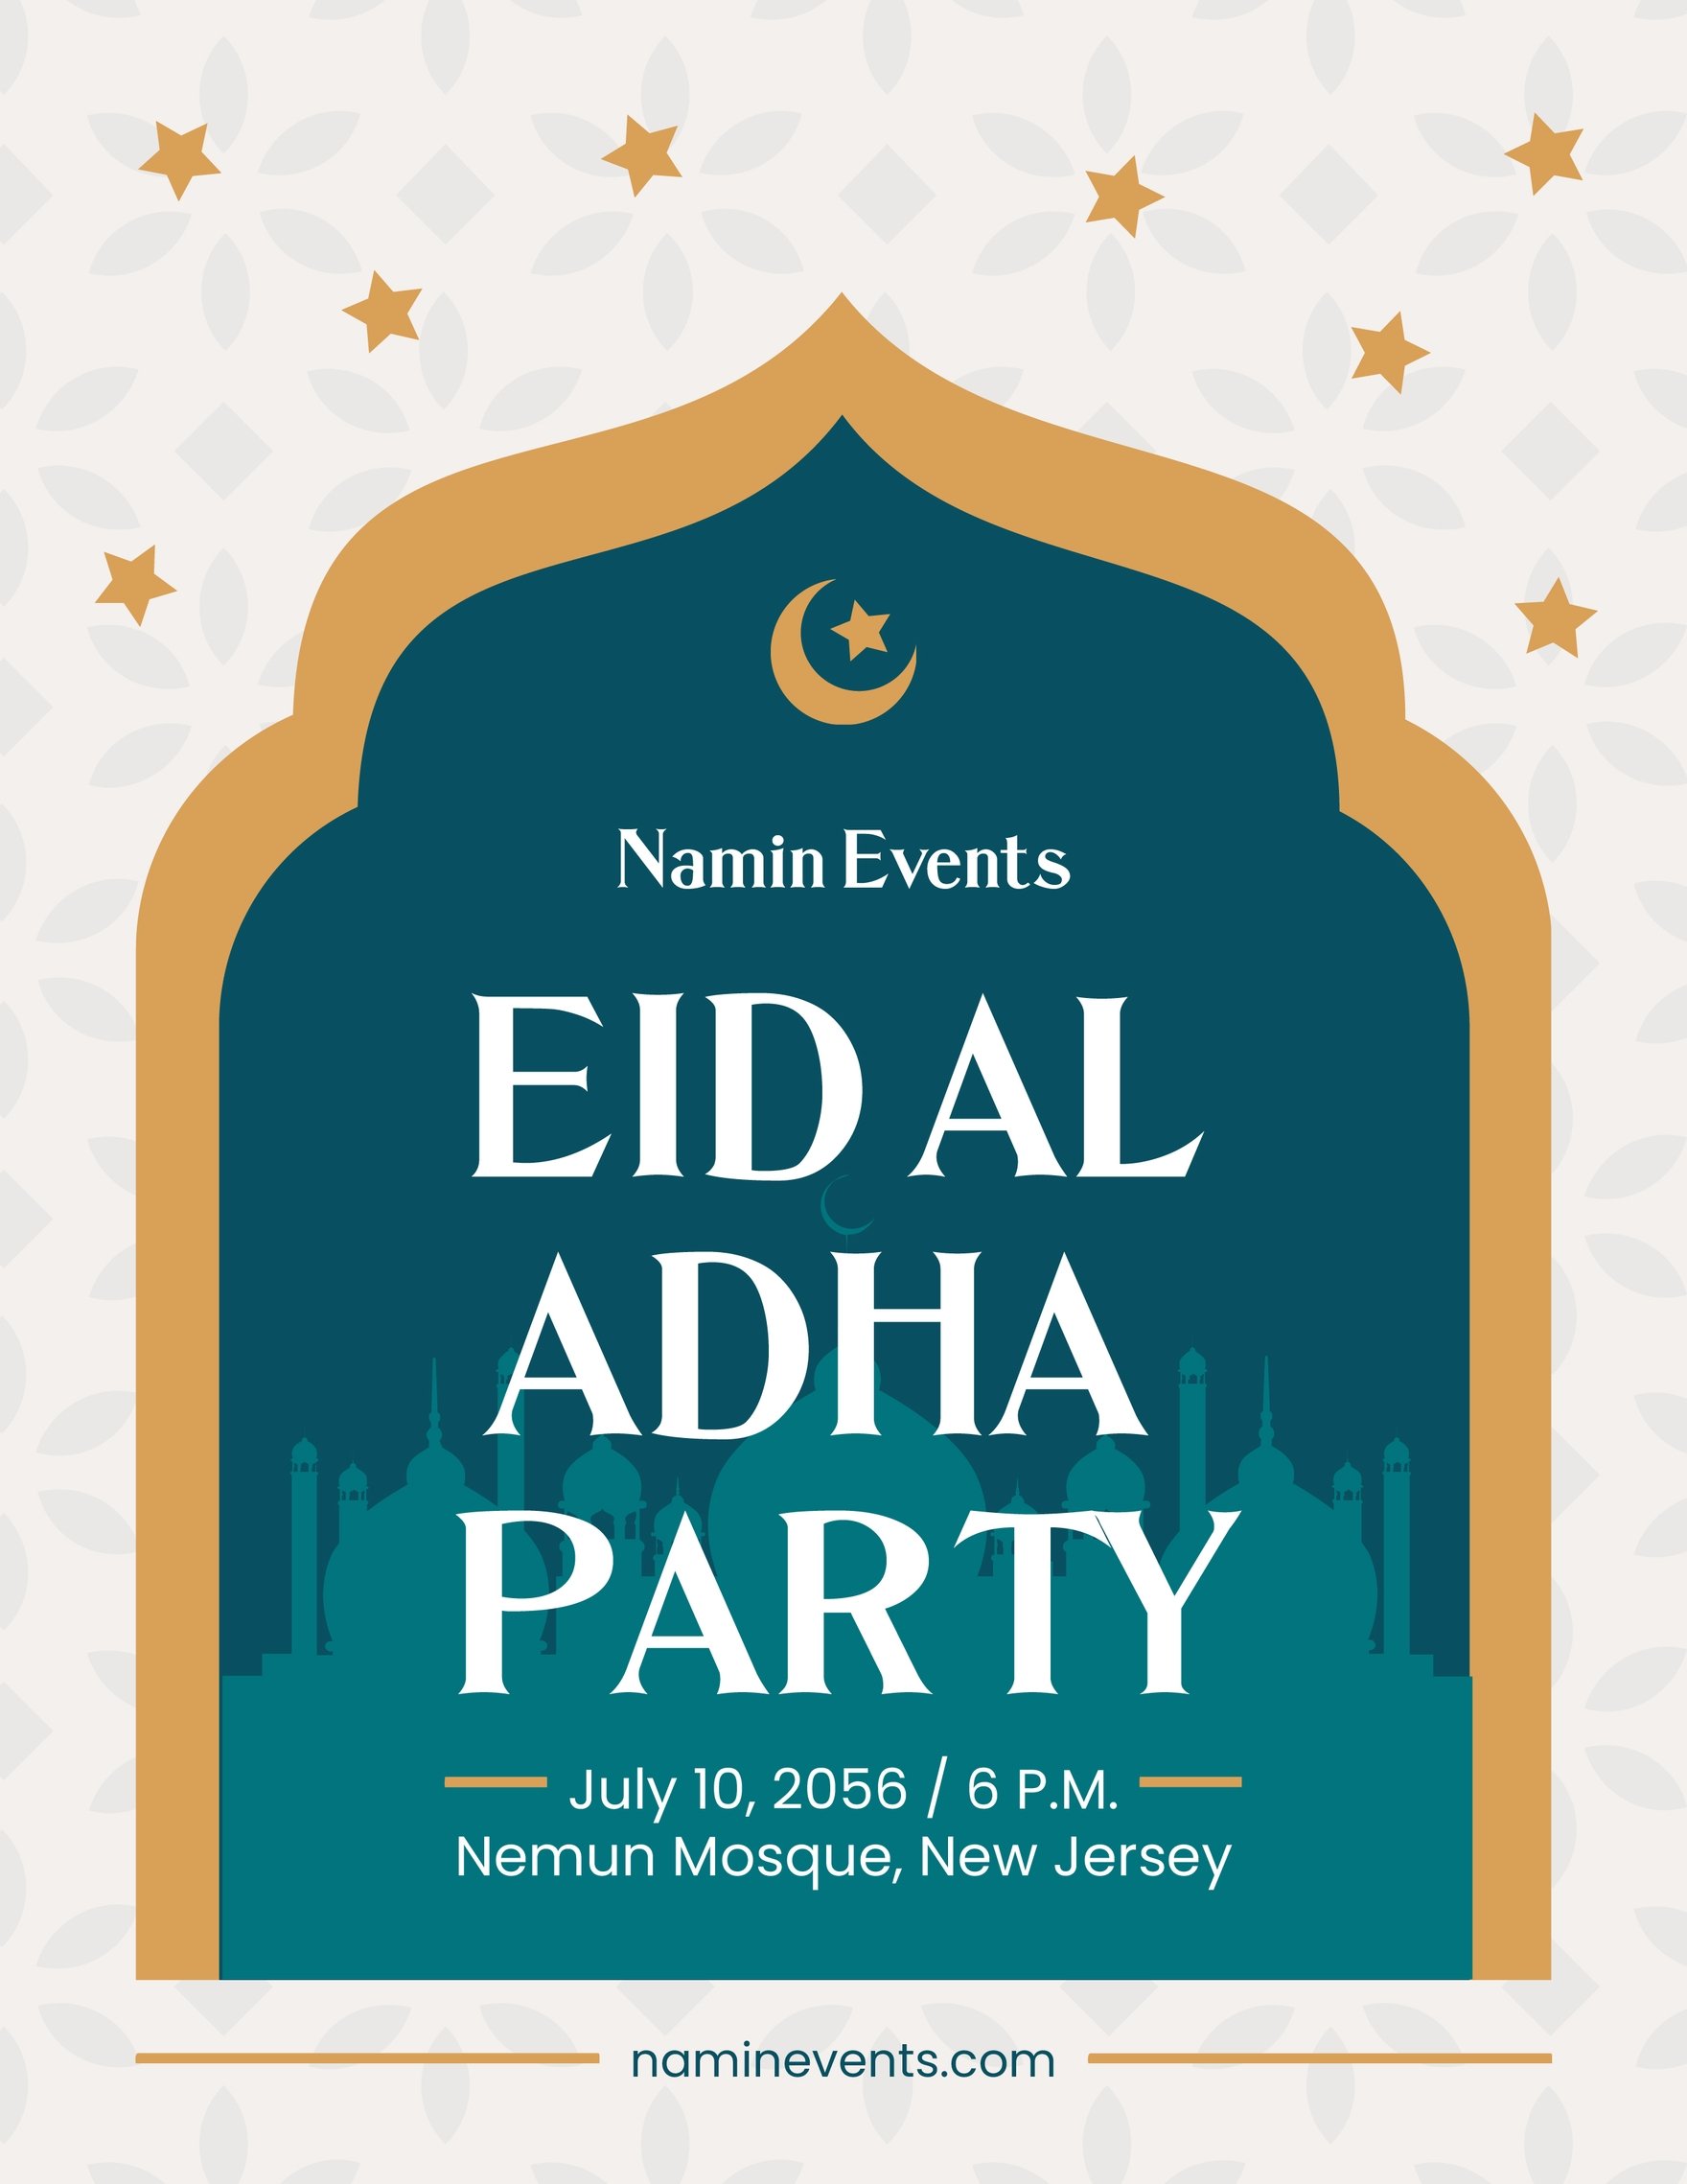 Free Eid Al Adha Party Flyer Template in Word, Google Docs, Illustrator, PSD, Apple Pages, Publisher